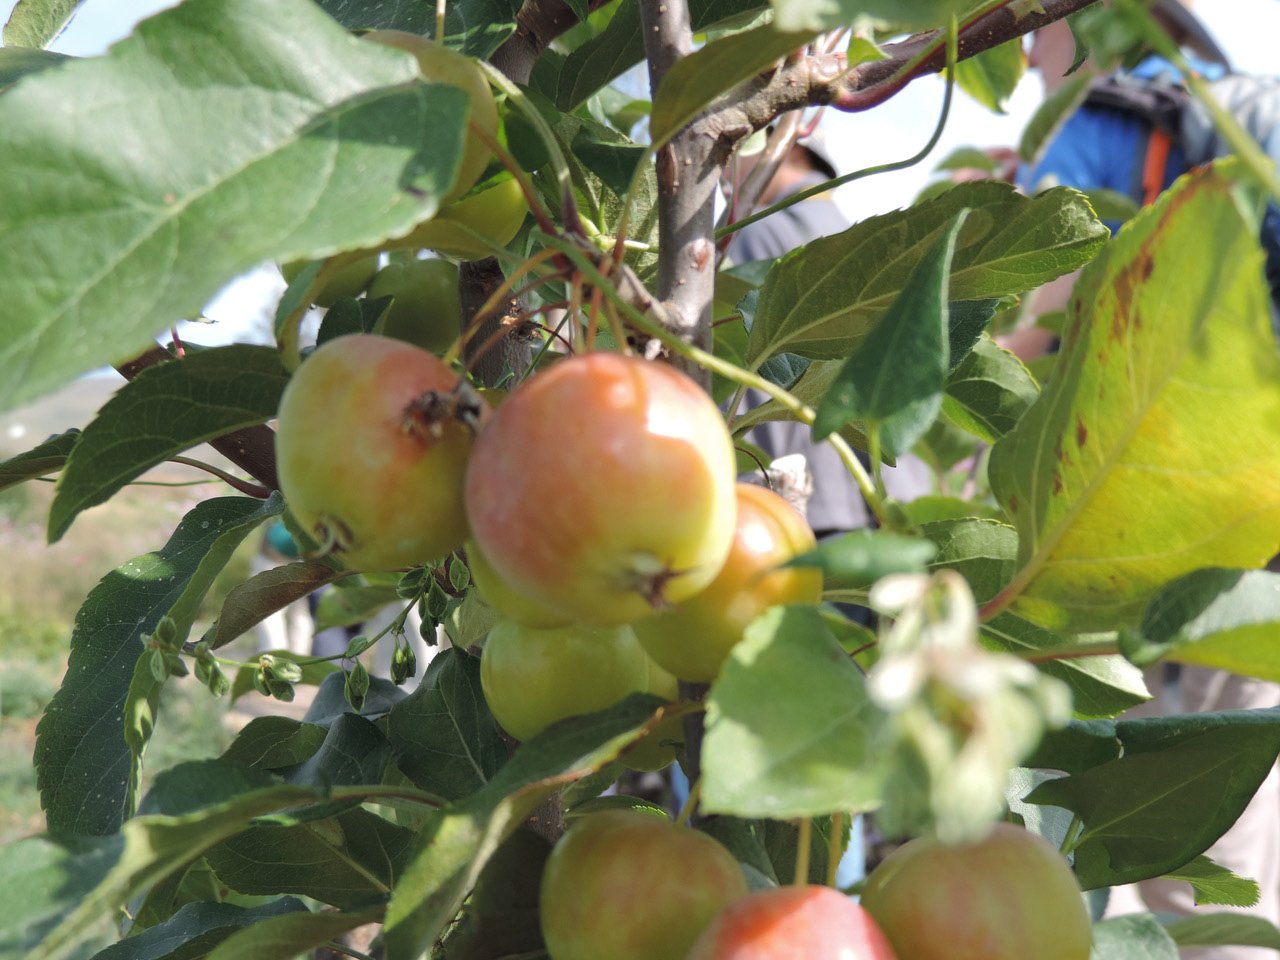 Tasman was New Zealand's second largest apple producer behind Hawke's Bay. Photo: Charmian Smith